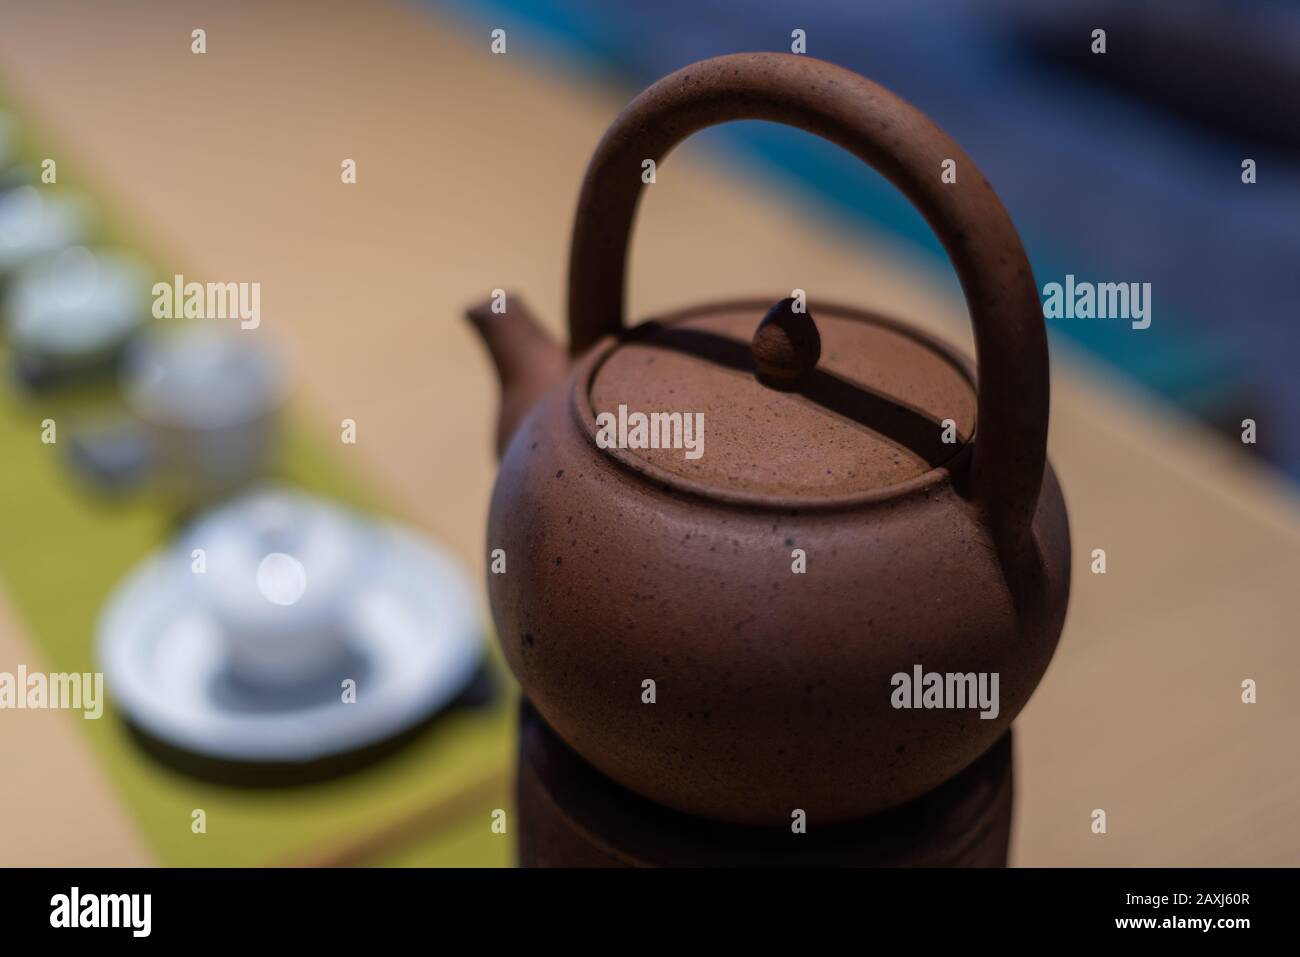 Traditional Chinese tea Set up Stock Photo